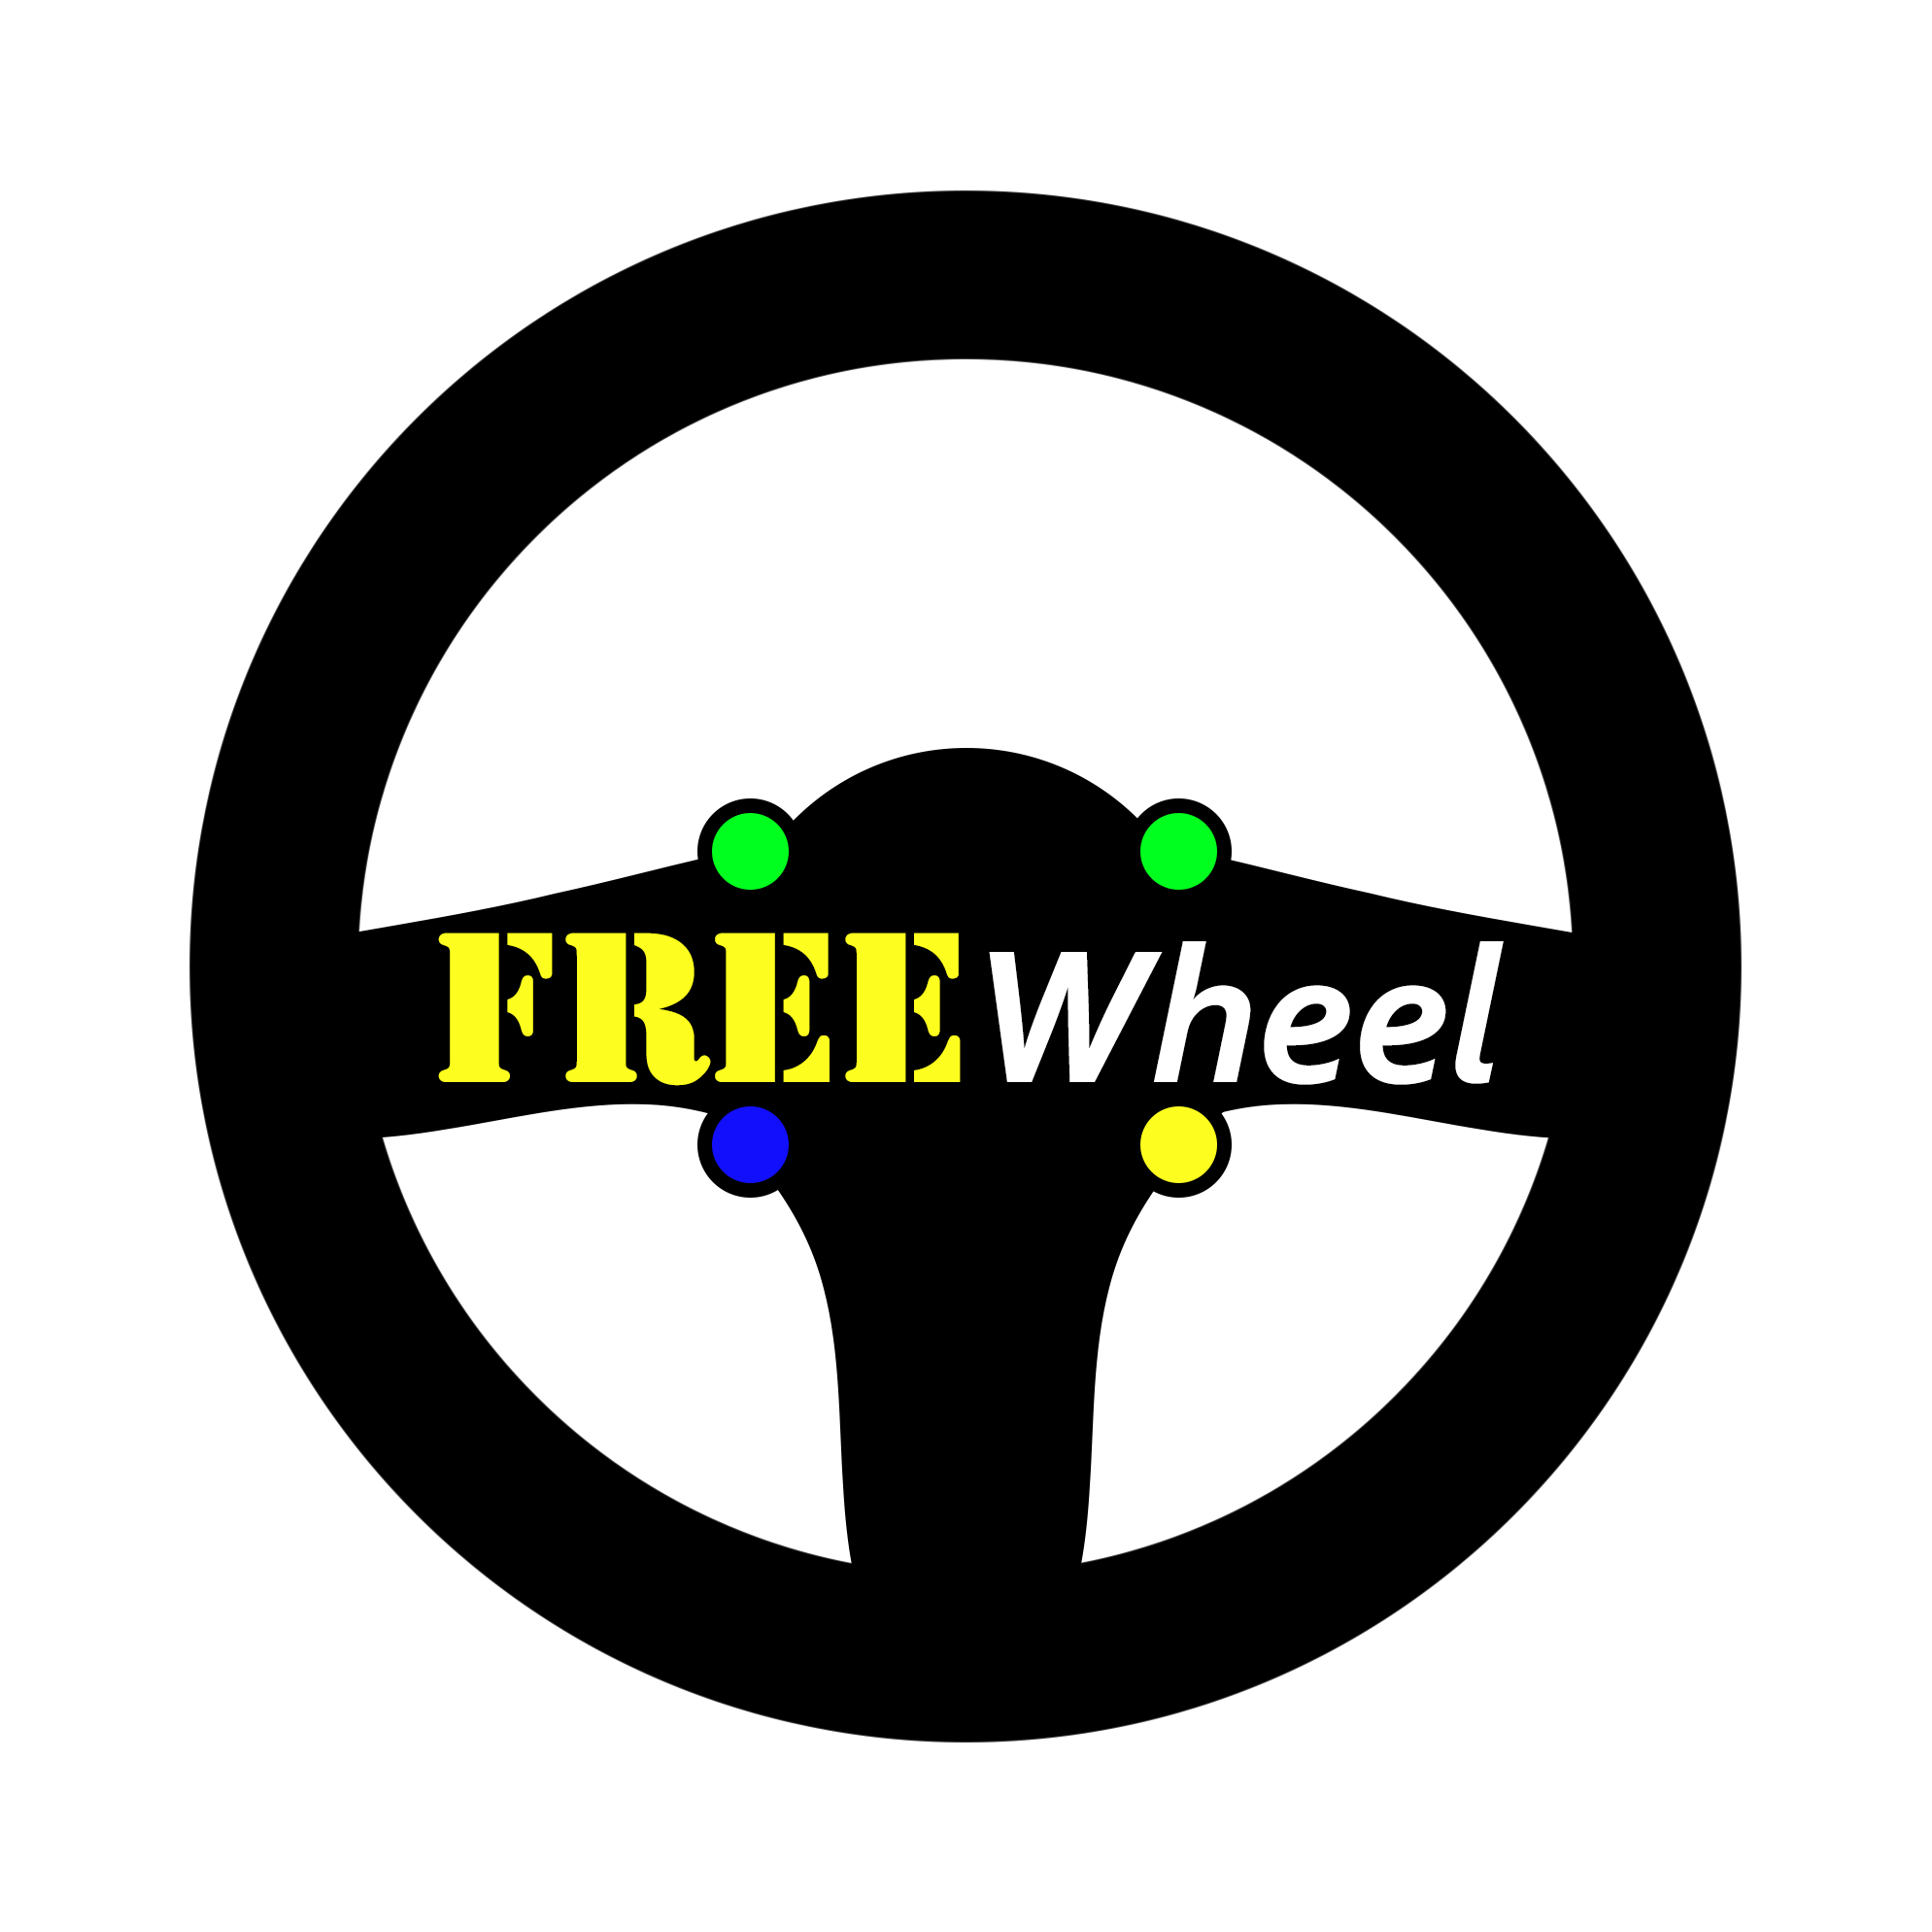 FREEWheel wireless steering wheel buttons, switches and paddleshifters control system.  Aftermarket upgrade for kit cars and race cars.